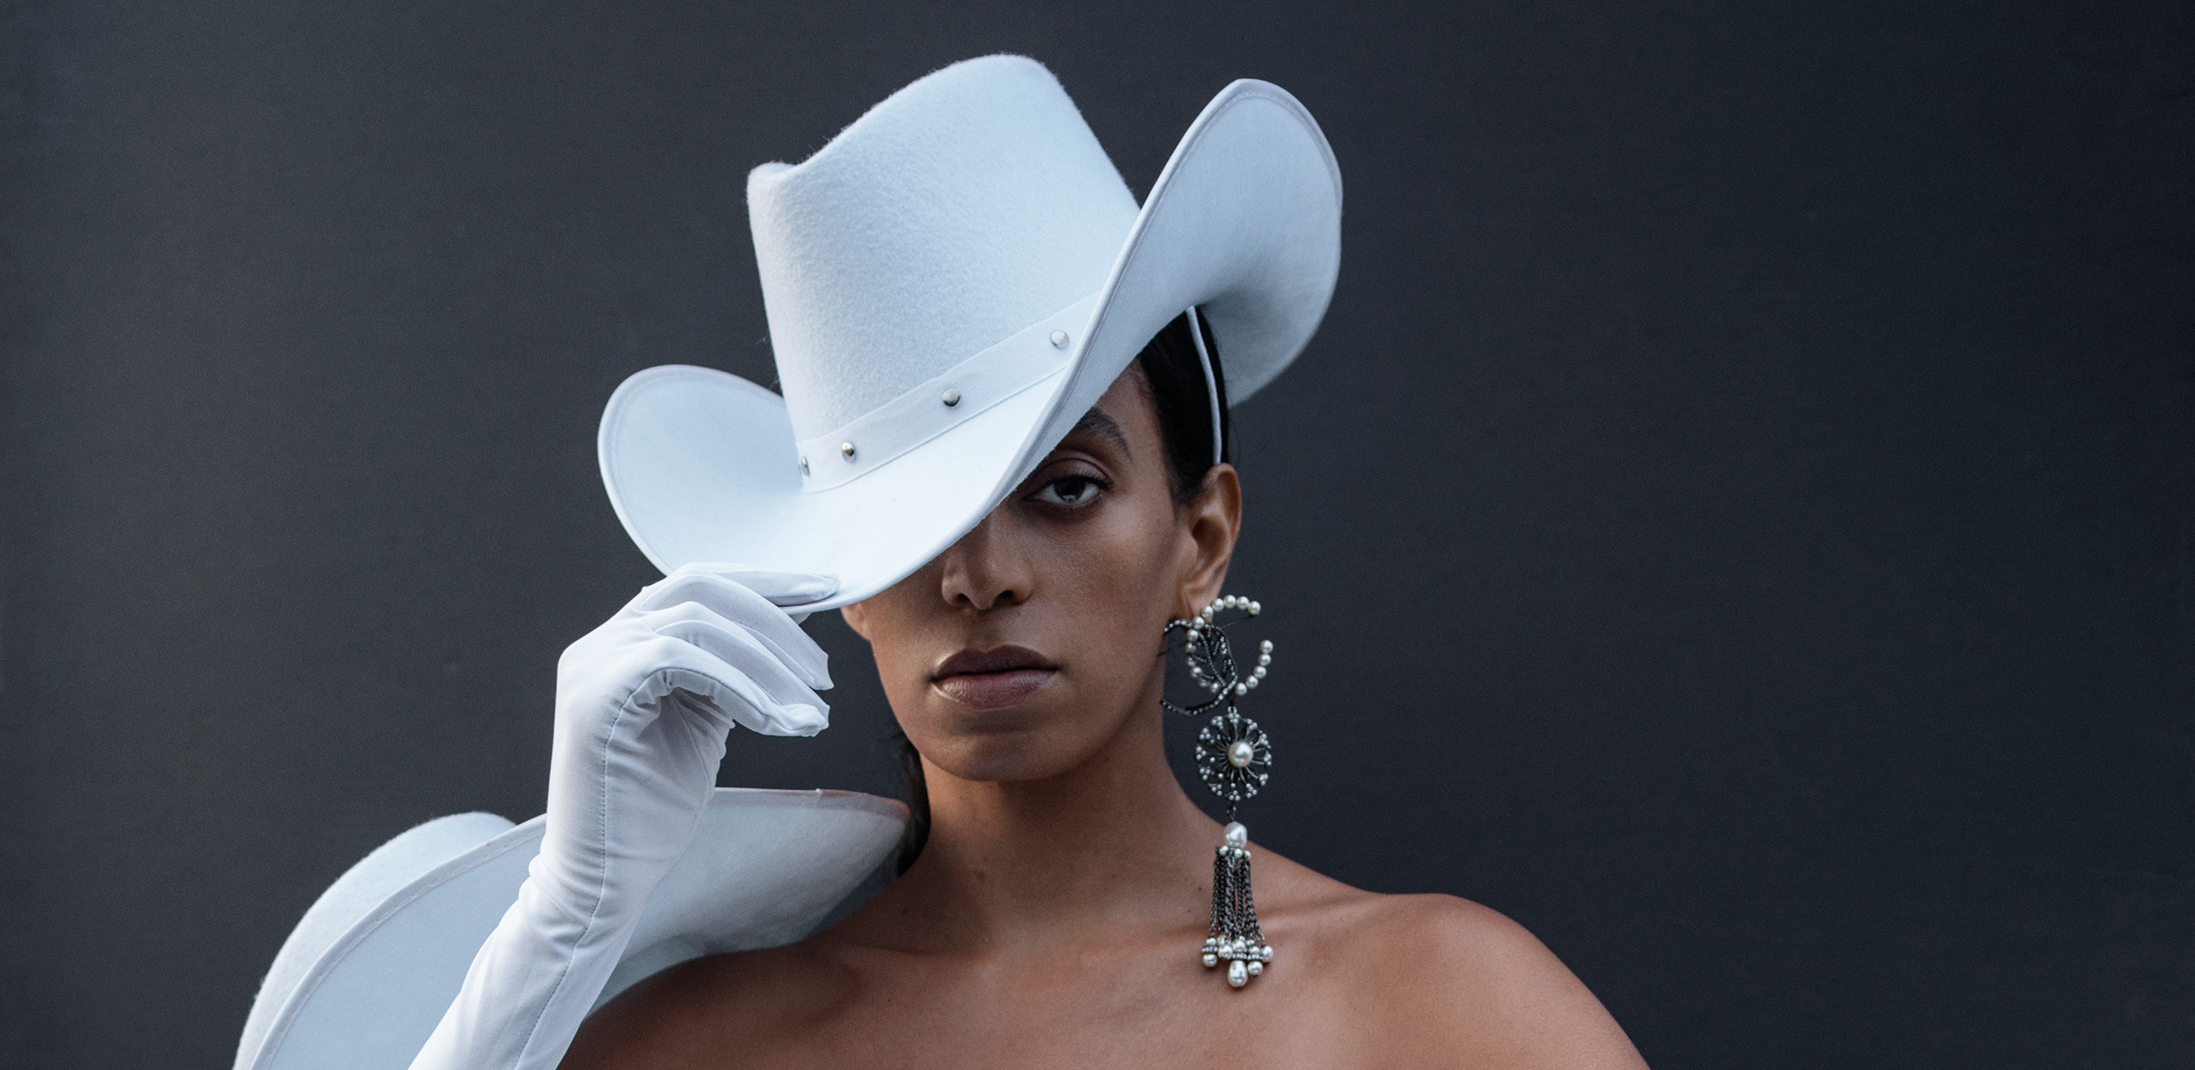 All the “Yeehaw” Worthy Looks in Solange’s When I Get Home